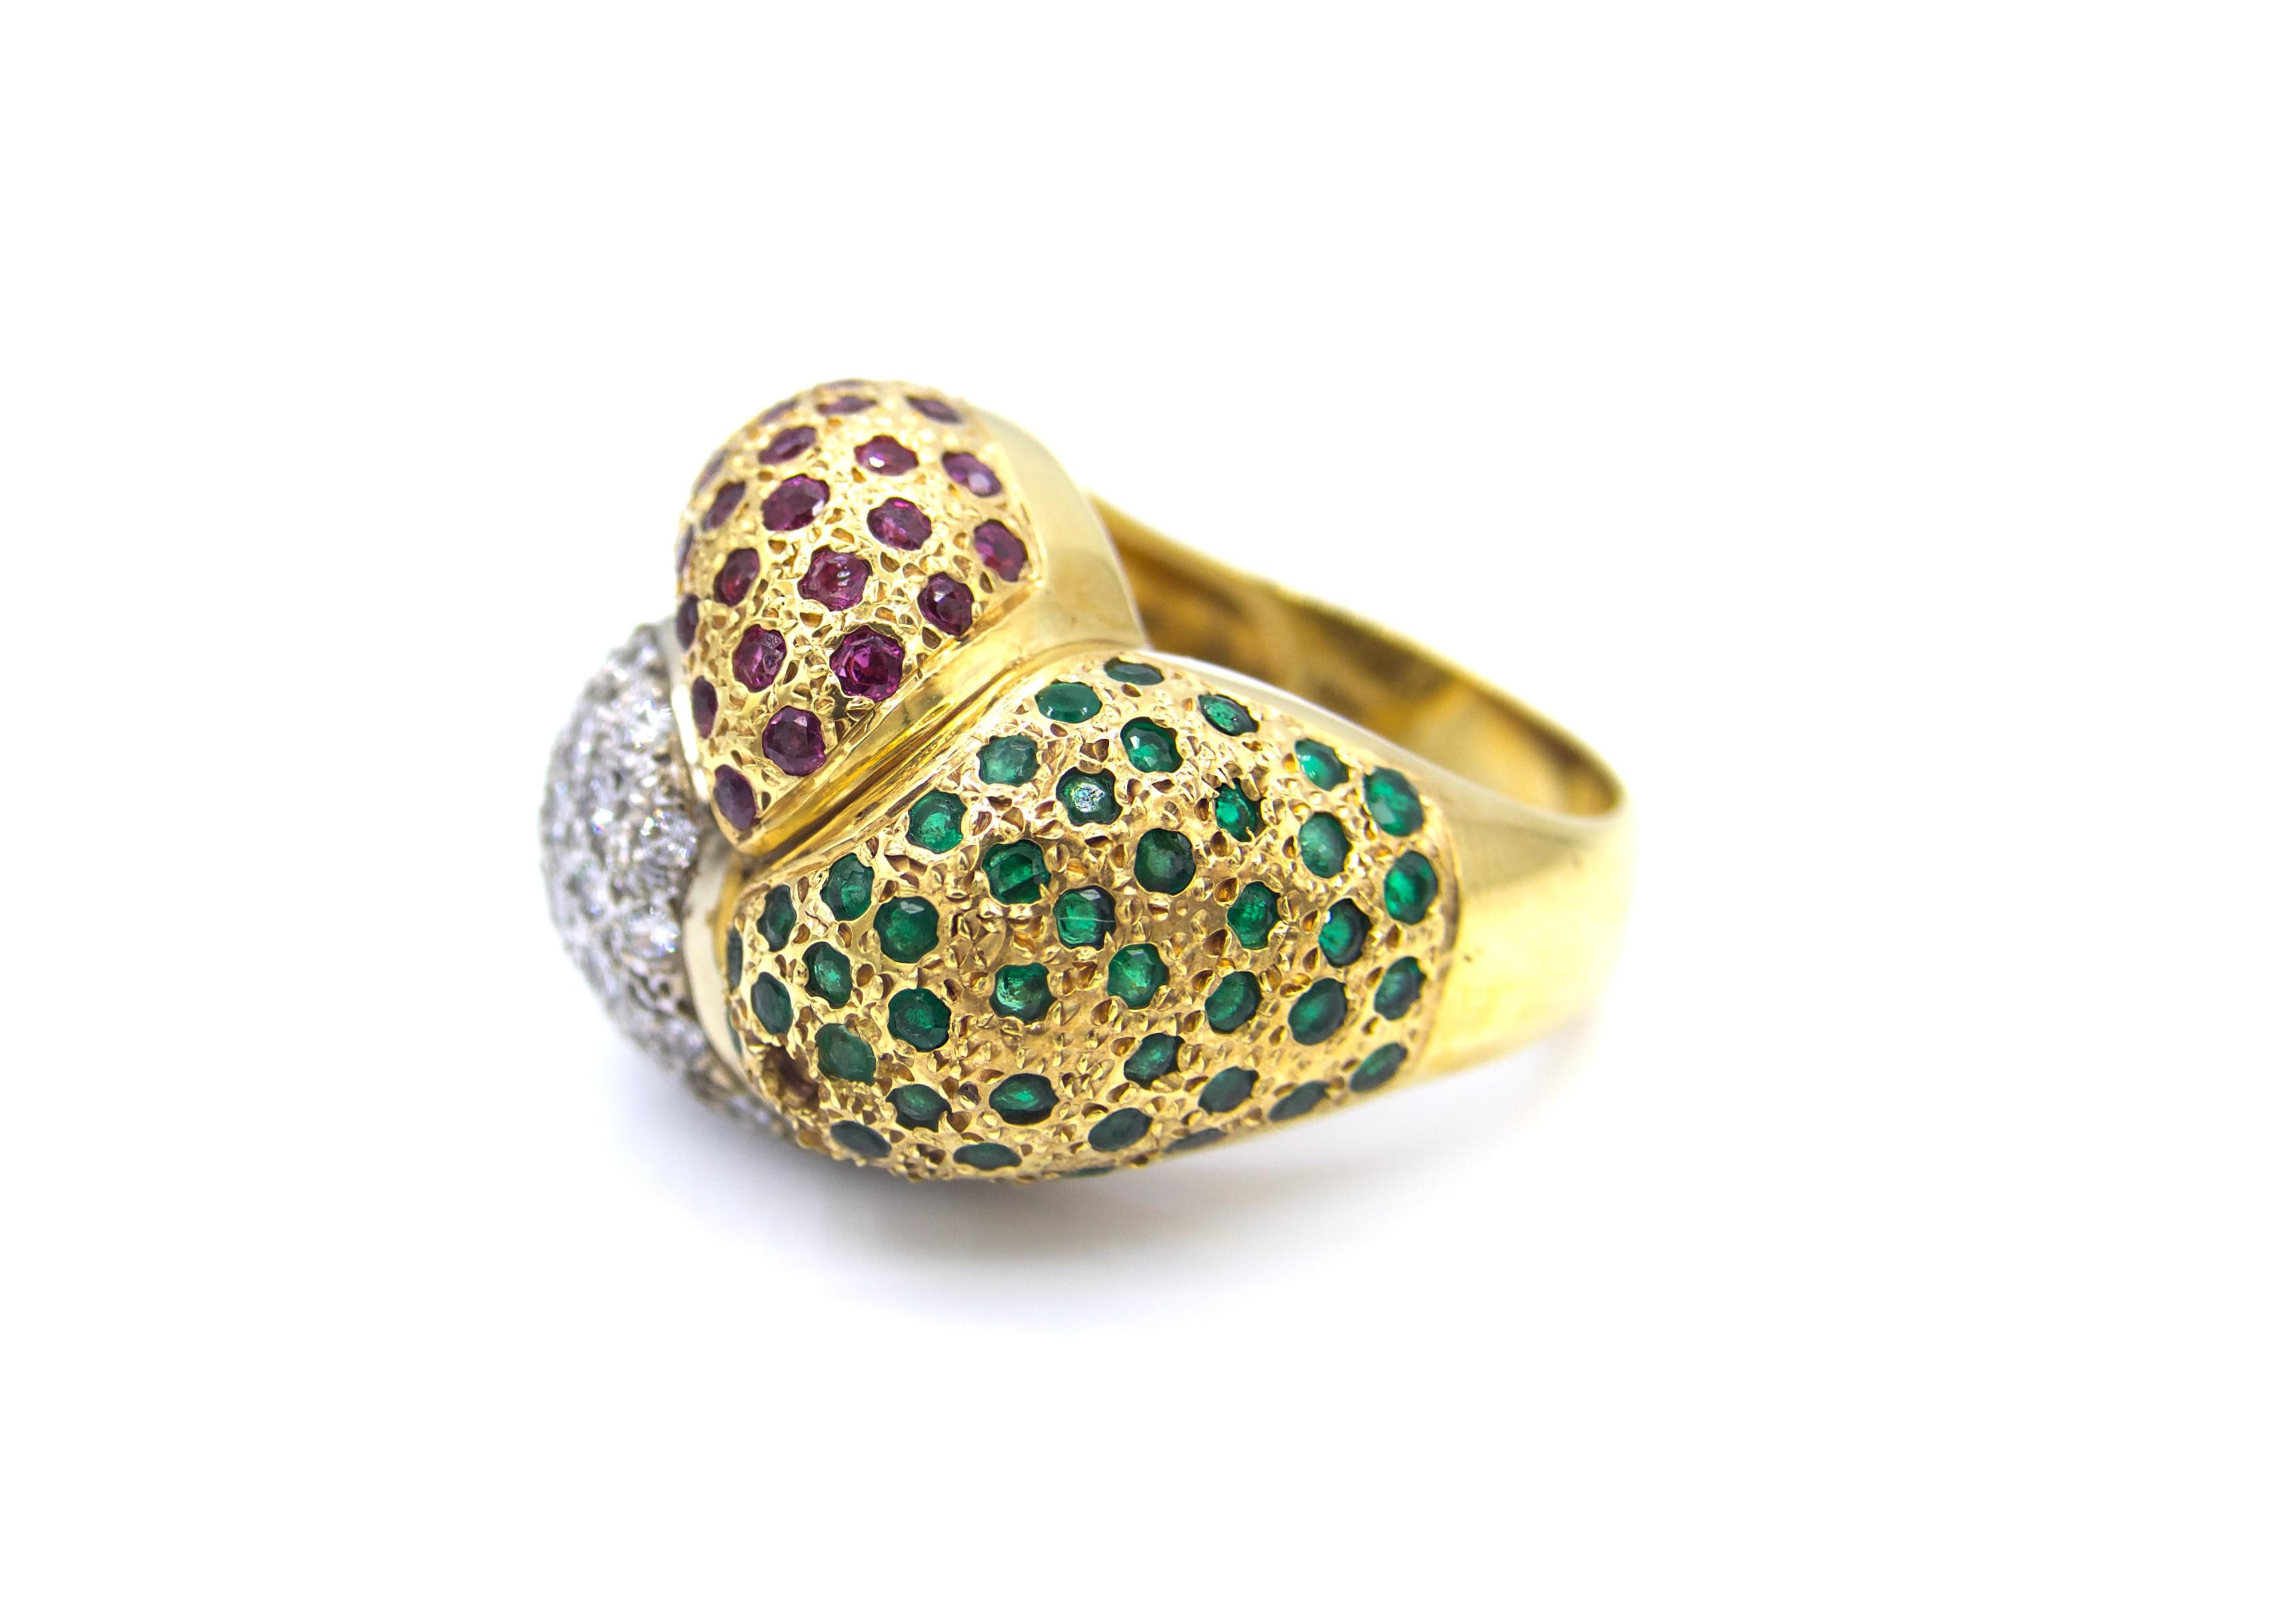 This 1990s emerald, ruby, and diamond cocktail ring is set in 18K yellow gold with white gold detailing for a two-toned look. The shape creates a twisted knot effect, with each part showing the different pave-set stones. 

16.7 grams

Size 6.5 
 